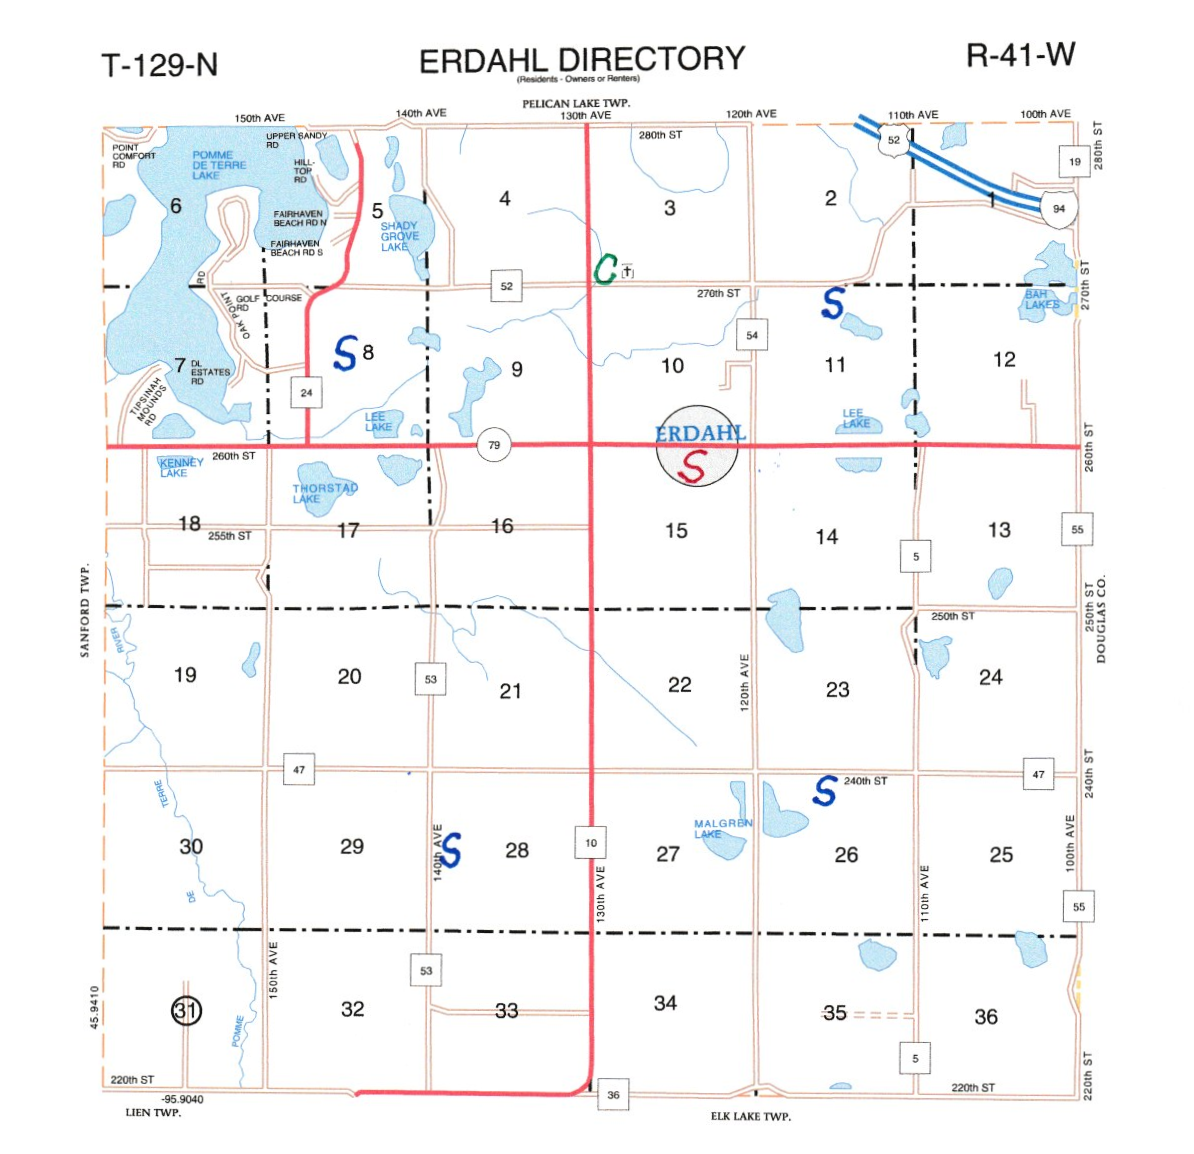 Erdahl Township early cemeteries and schools